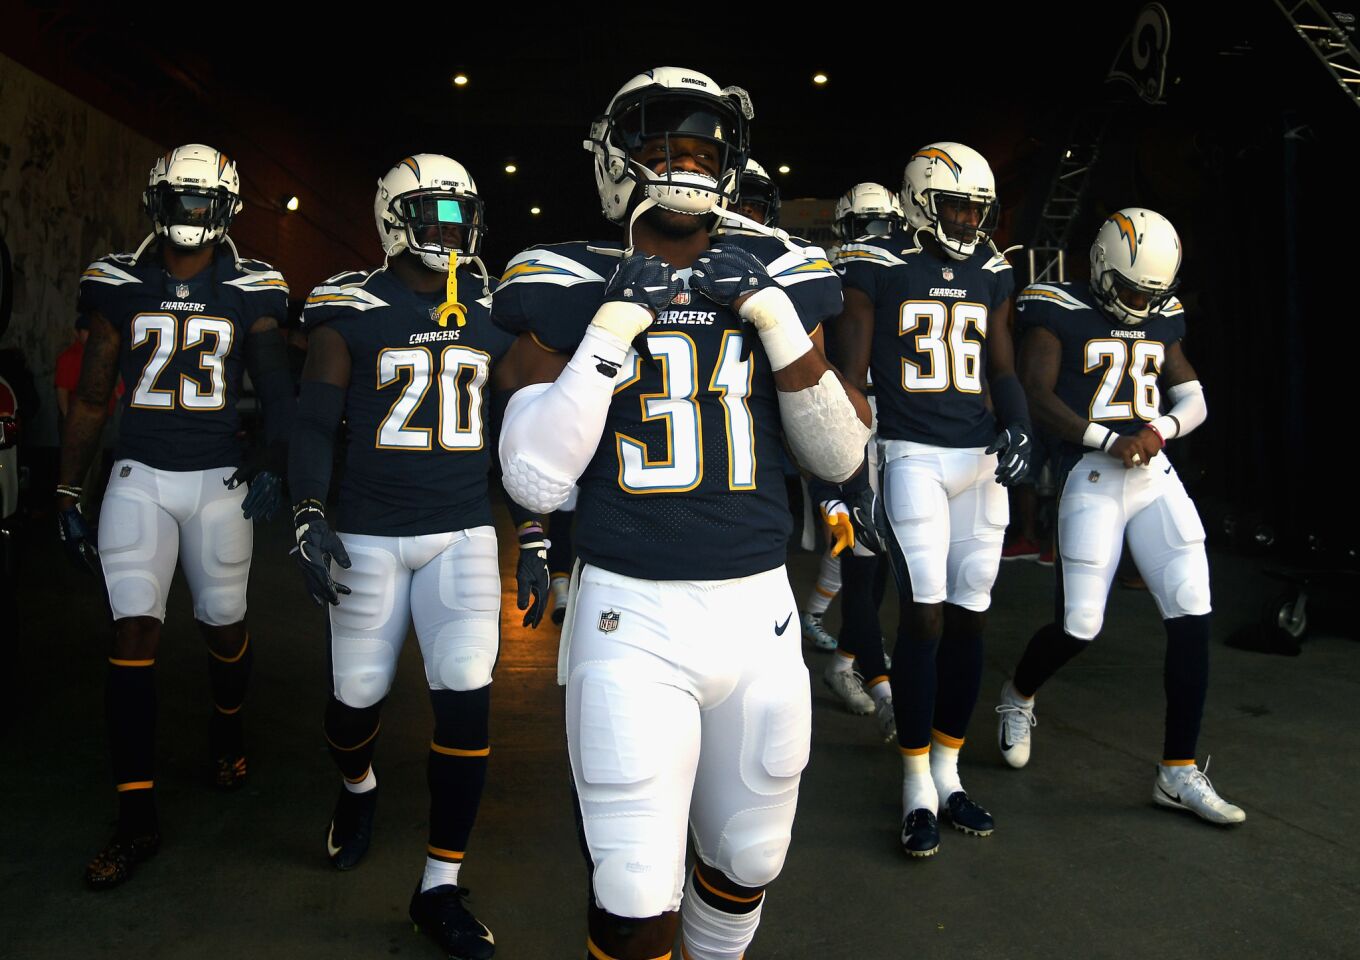 LOS ANGELES, CA - SEPTEMBER 23: Adrian Phillips #31 of the Los Angeles Chargers stands with his teammates before taking the field to warm up prior to the start of the game against the Los Angeles Rams at Los Angeles Memorial Coliseum on September 23, 2018 in Los Angeles, California.